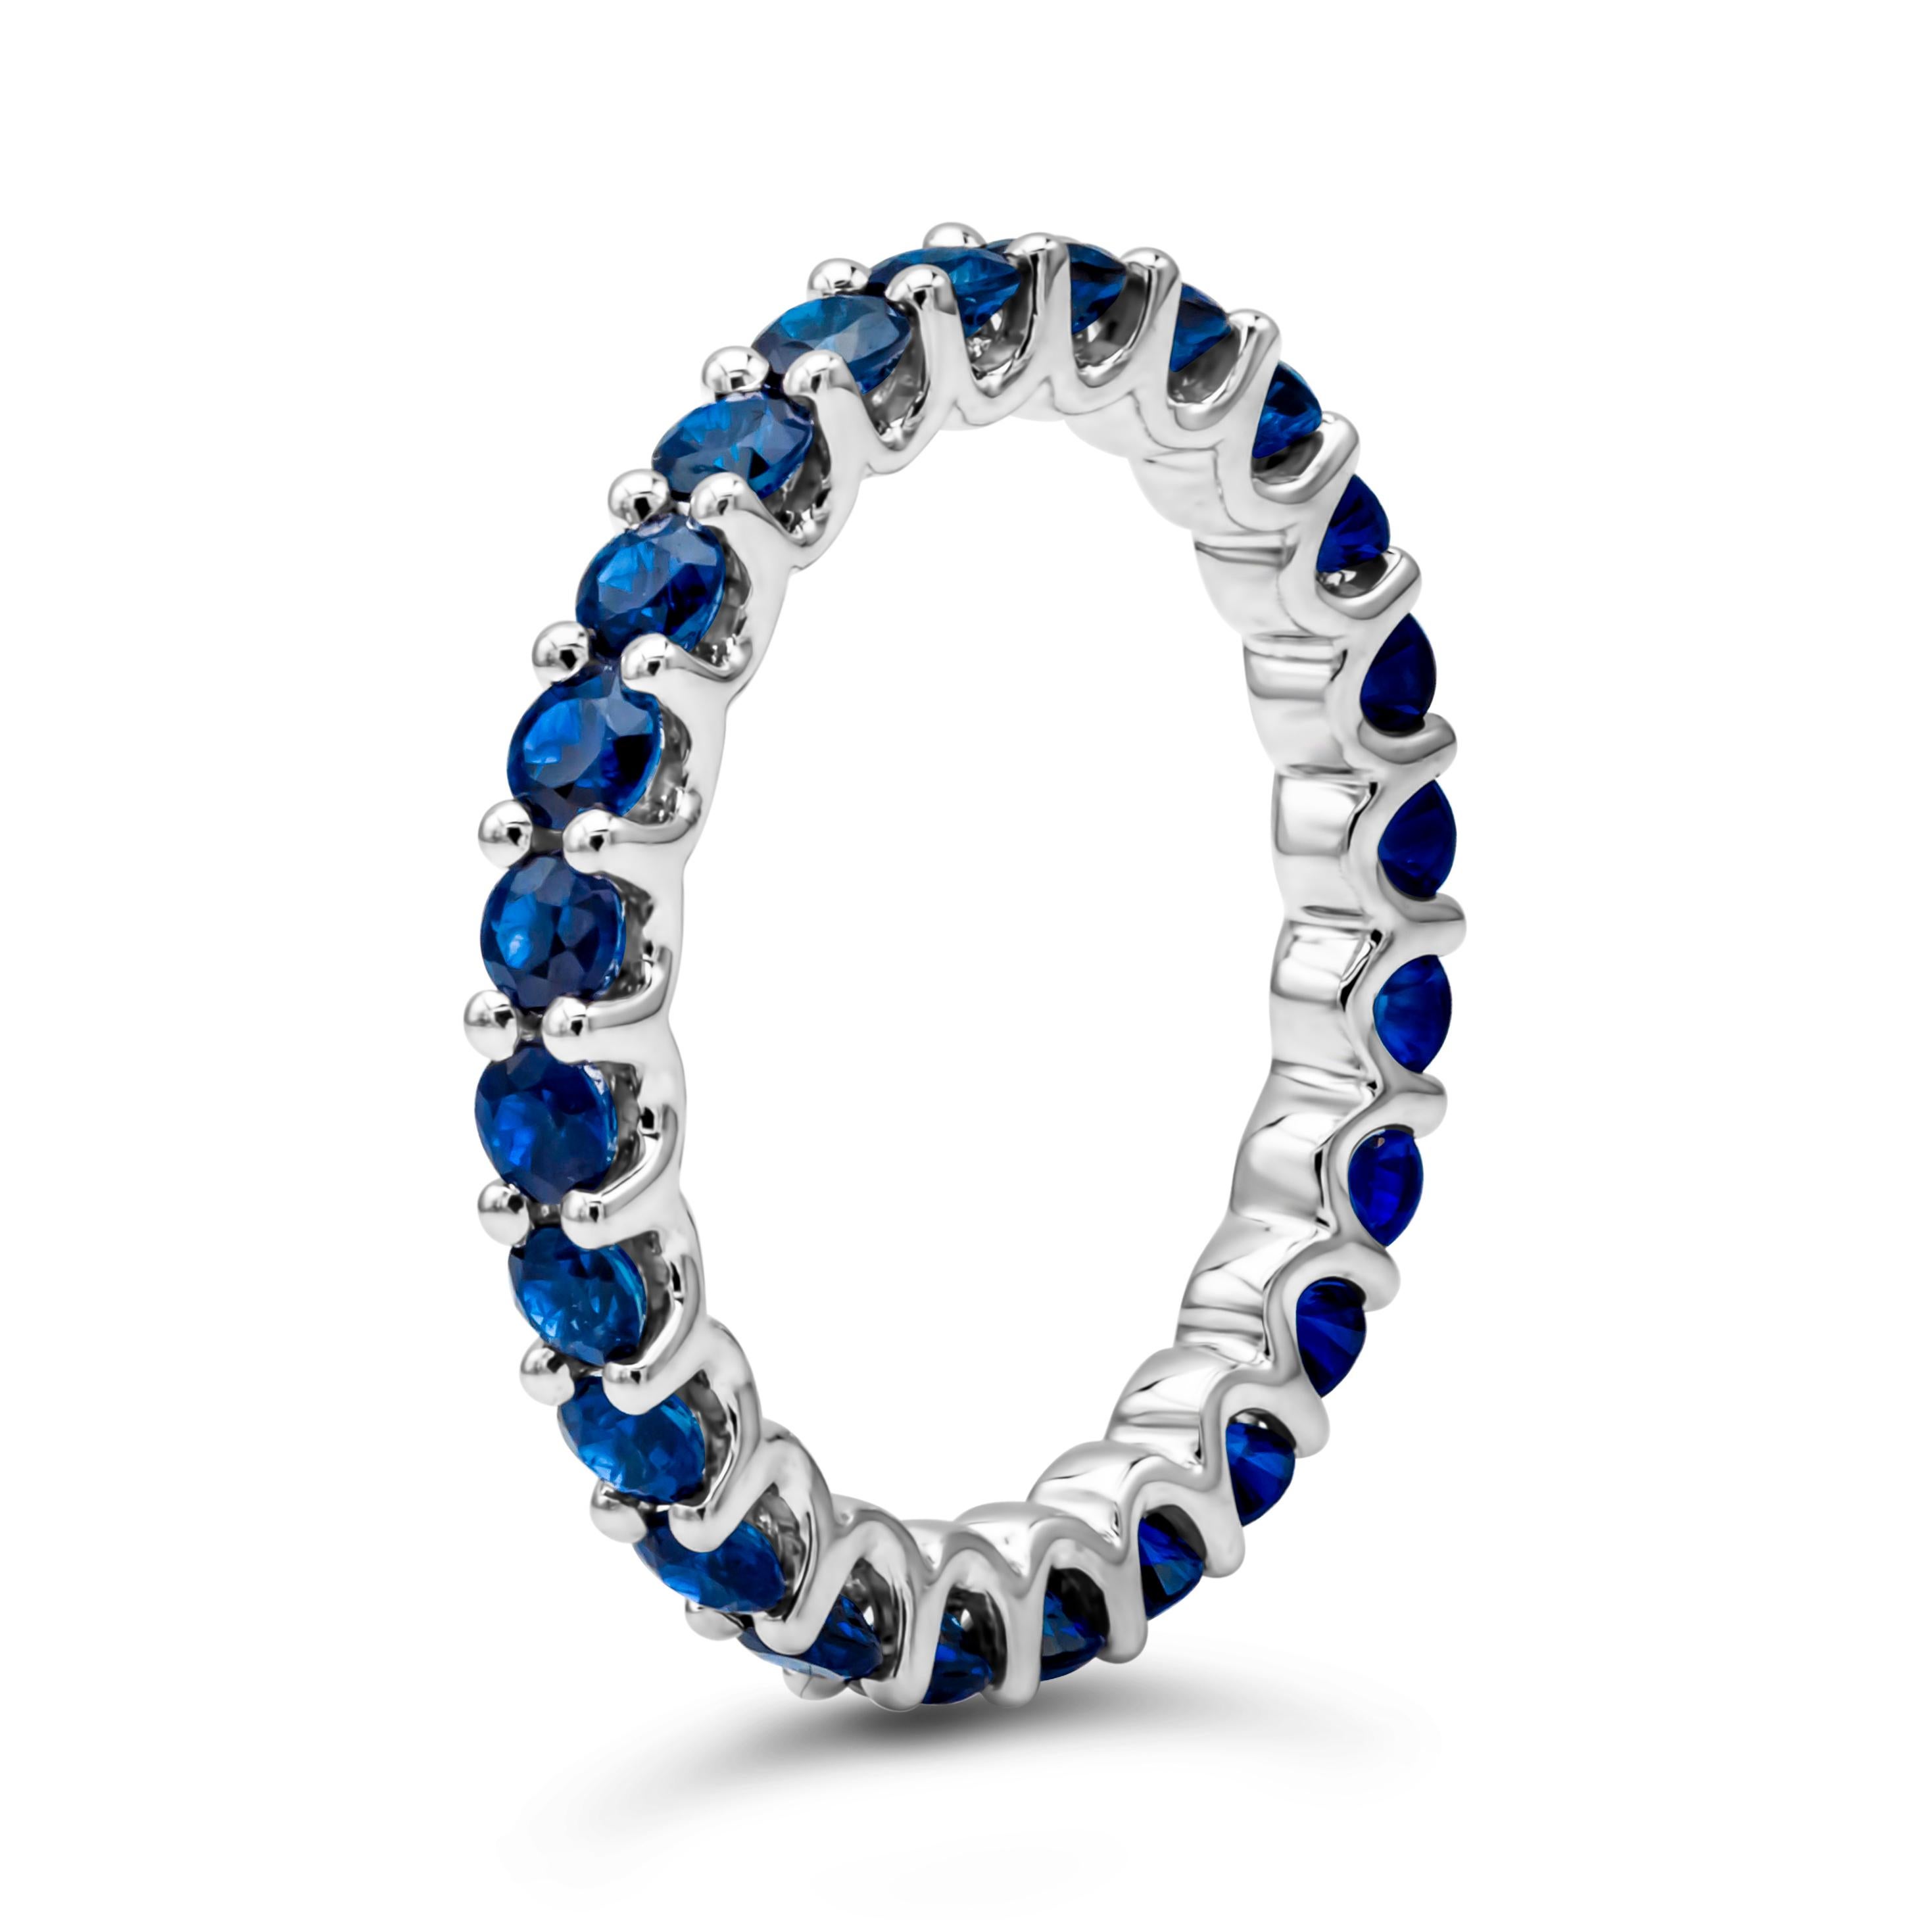 An appealing eternity wedding band style showcasing a color-rich brilliant round cut blue sapphires weighing 1.95 carats total, set in a classic shared prong setting. Finely made in 18k white gold. Size 6.5 US resizable upon request.

Style